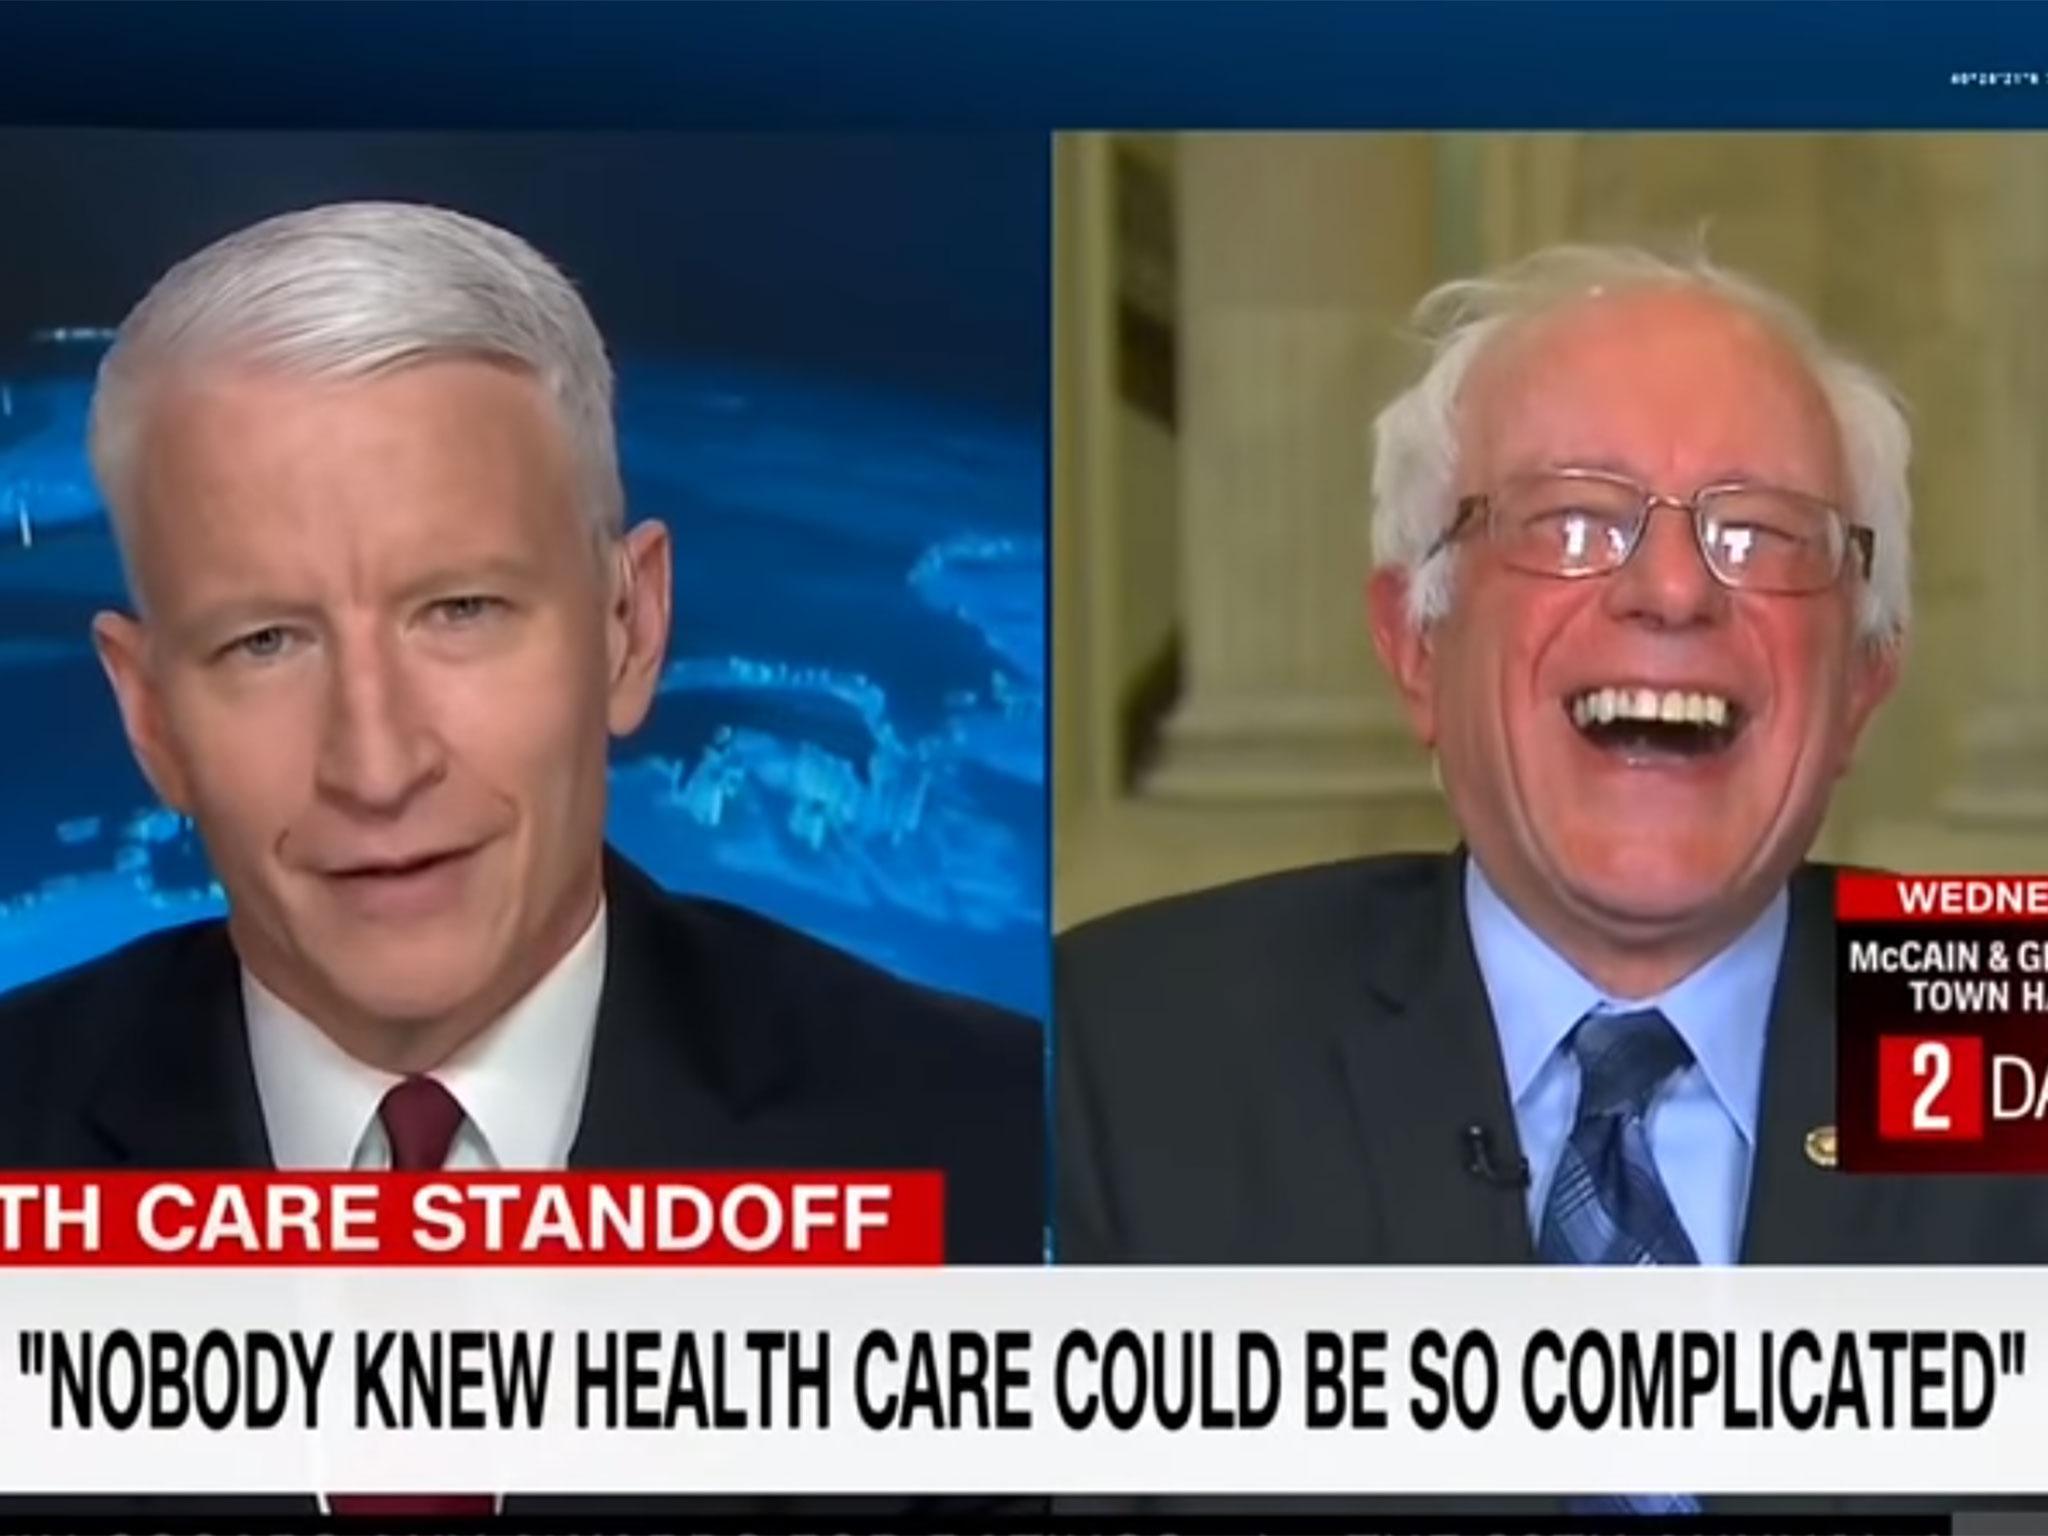 Bernie Sanders says, 'Yeah, we had a clue' in response to the President's claim